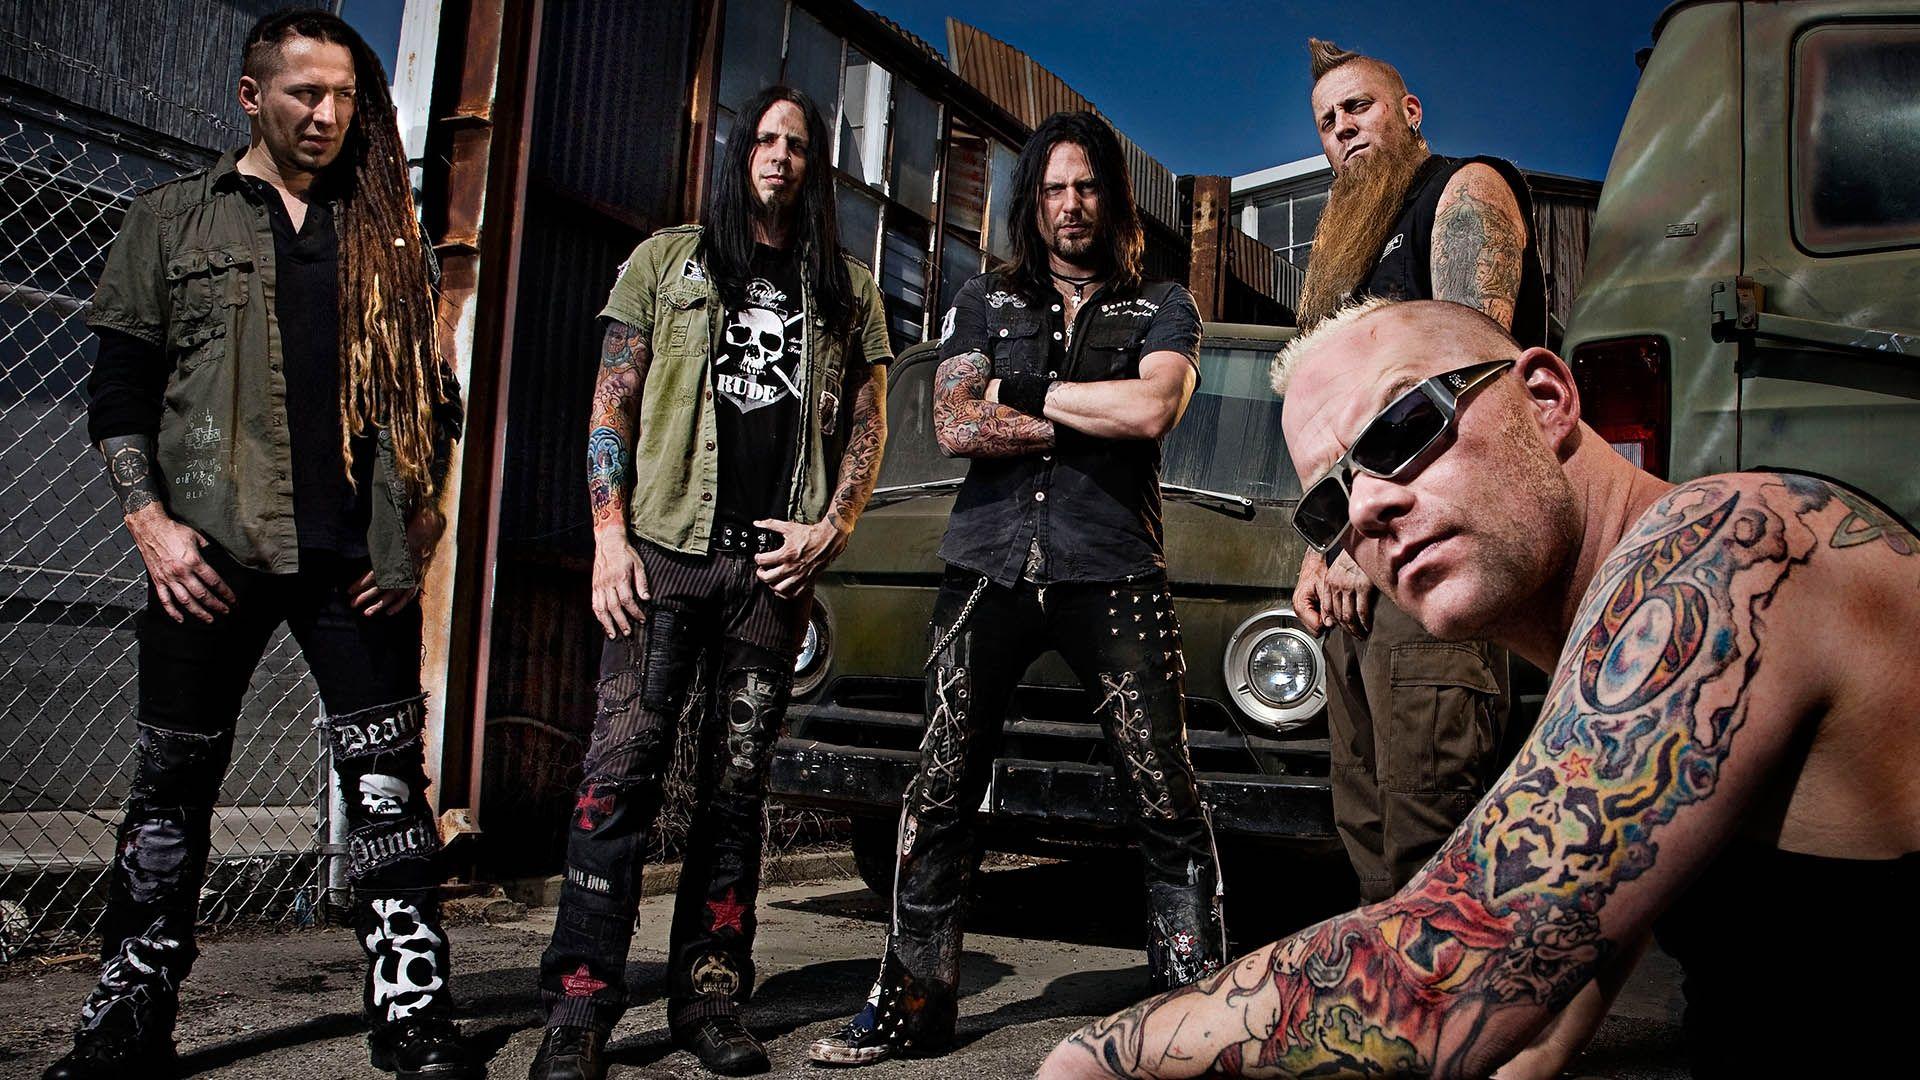 Download Wallpaper 1920x1080 five finger death punch, tattoo, cars